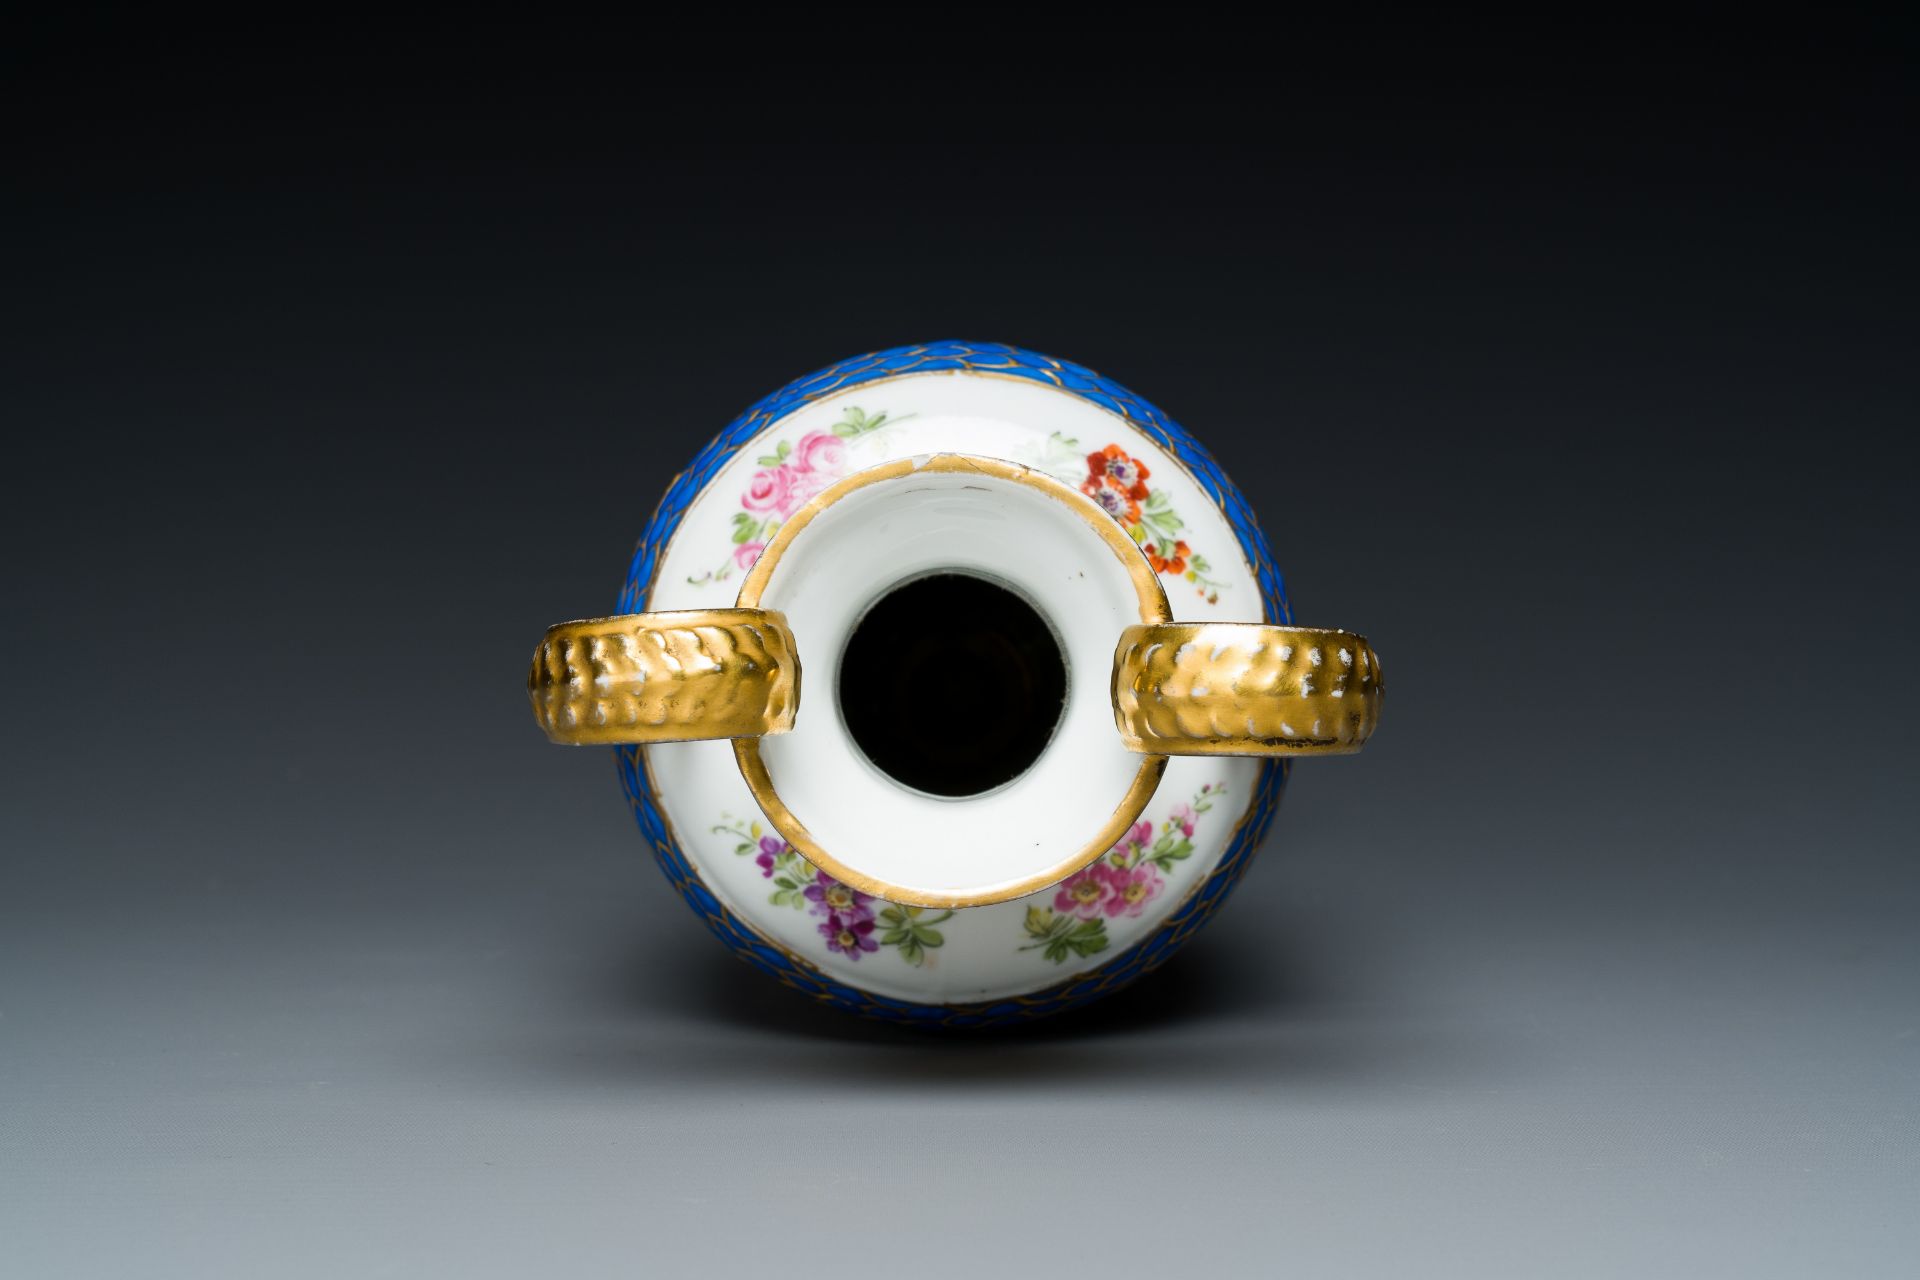 A French polychrome porcelain Sevres-style vase, 19th C. - Image 11 of 16